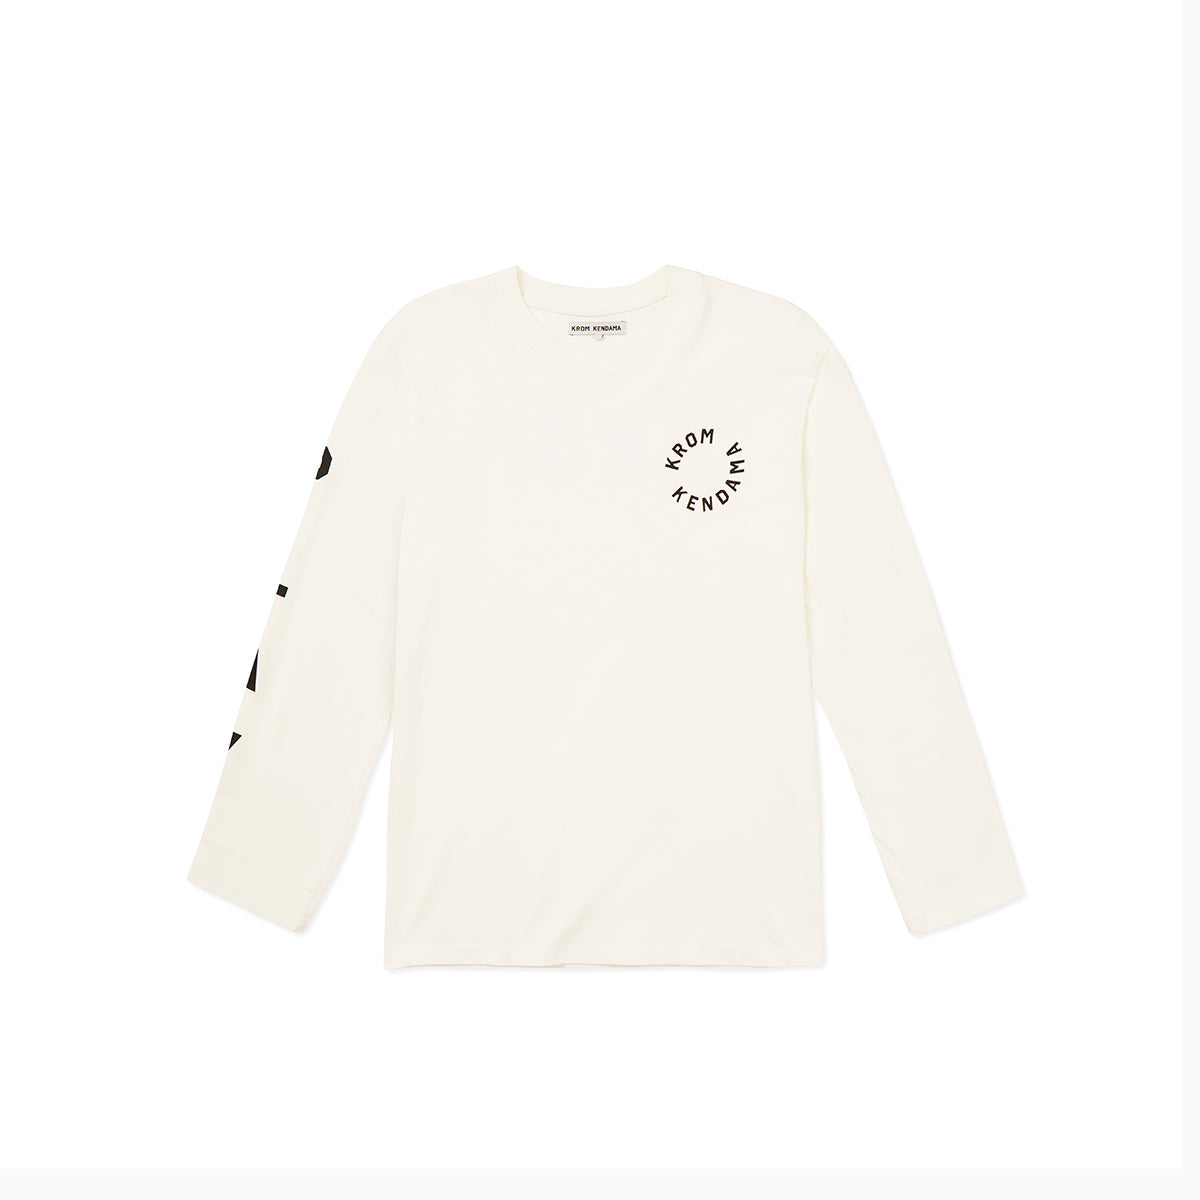 KROM PLAY LIFE COLLECTION MAIN FRONT PICTURE LONG SLEEVE WHITE